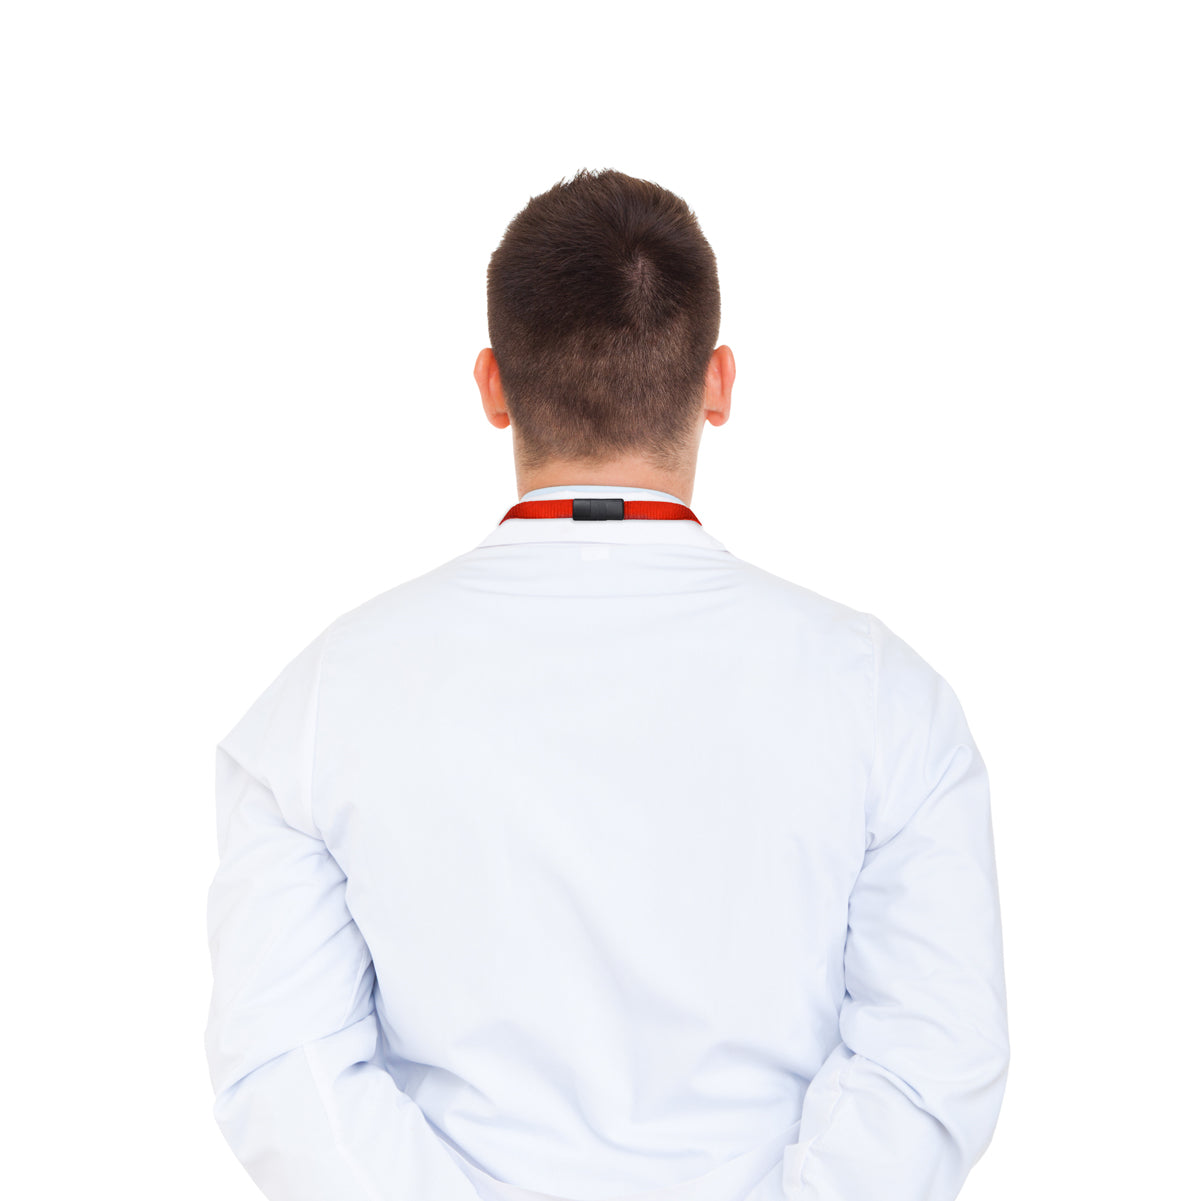 A person wearing a white lab coat and a red Triple Breakaway Lanyard with THREE Safety Breakaway Points (2137-300X), viewed from the back, with their hands behind their back.